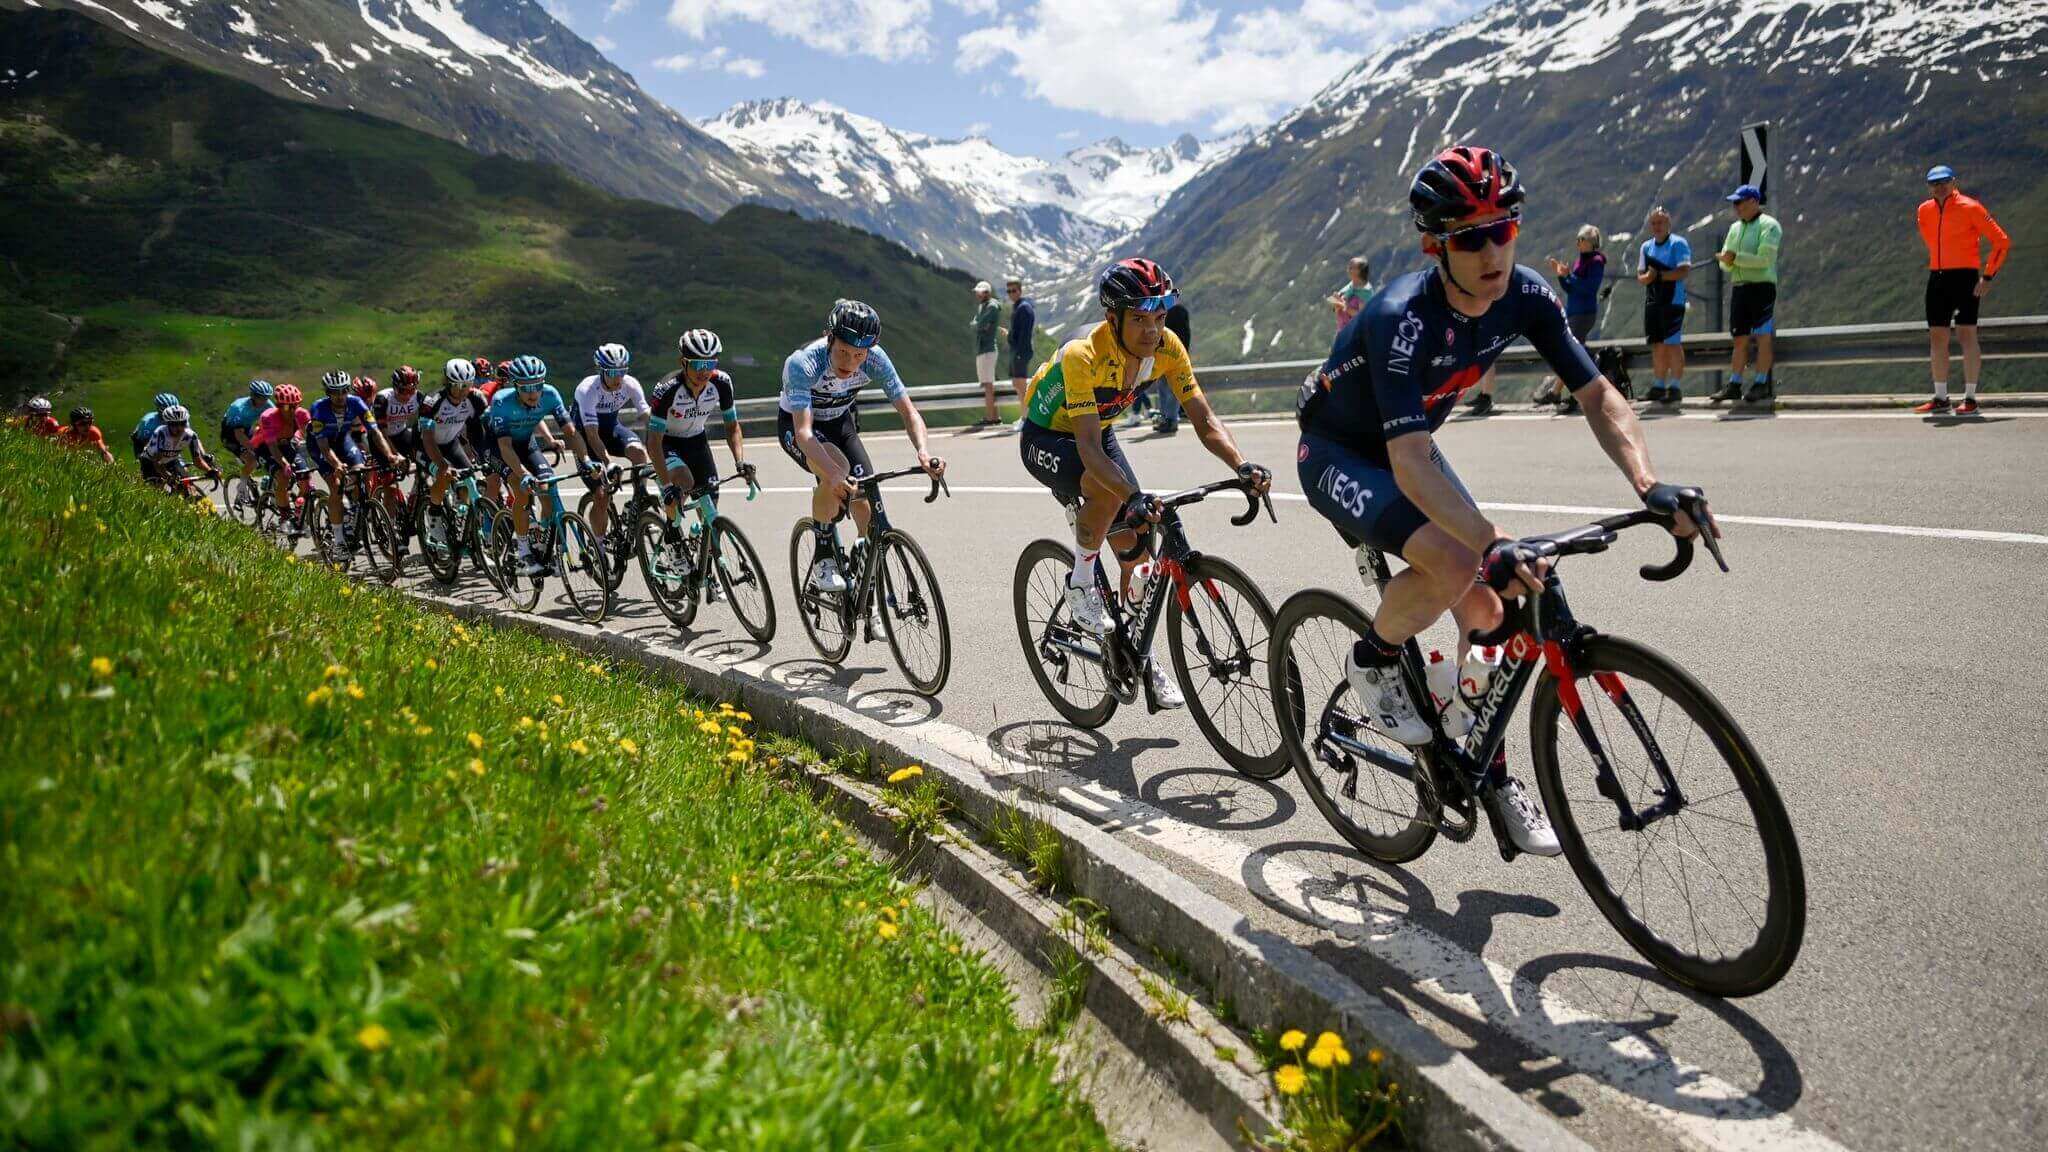 Tour de France: how to organize the greatest cycling race in history?